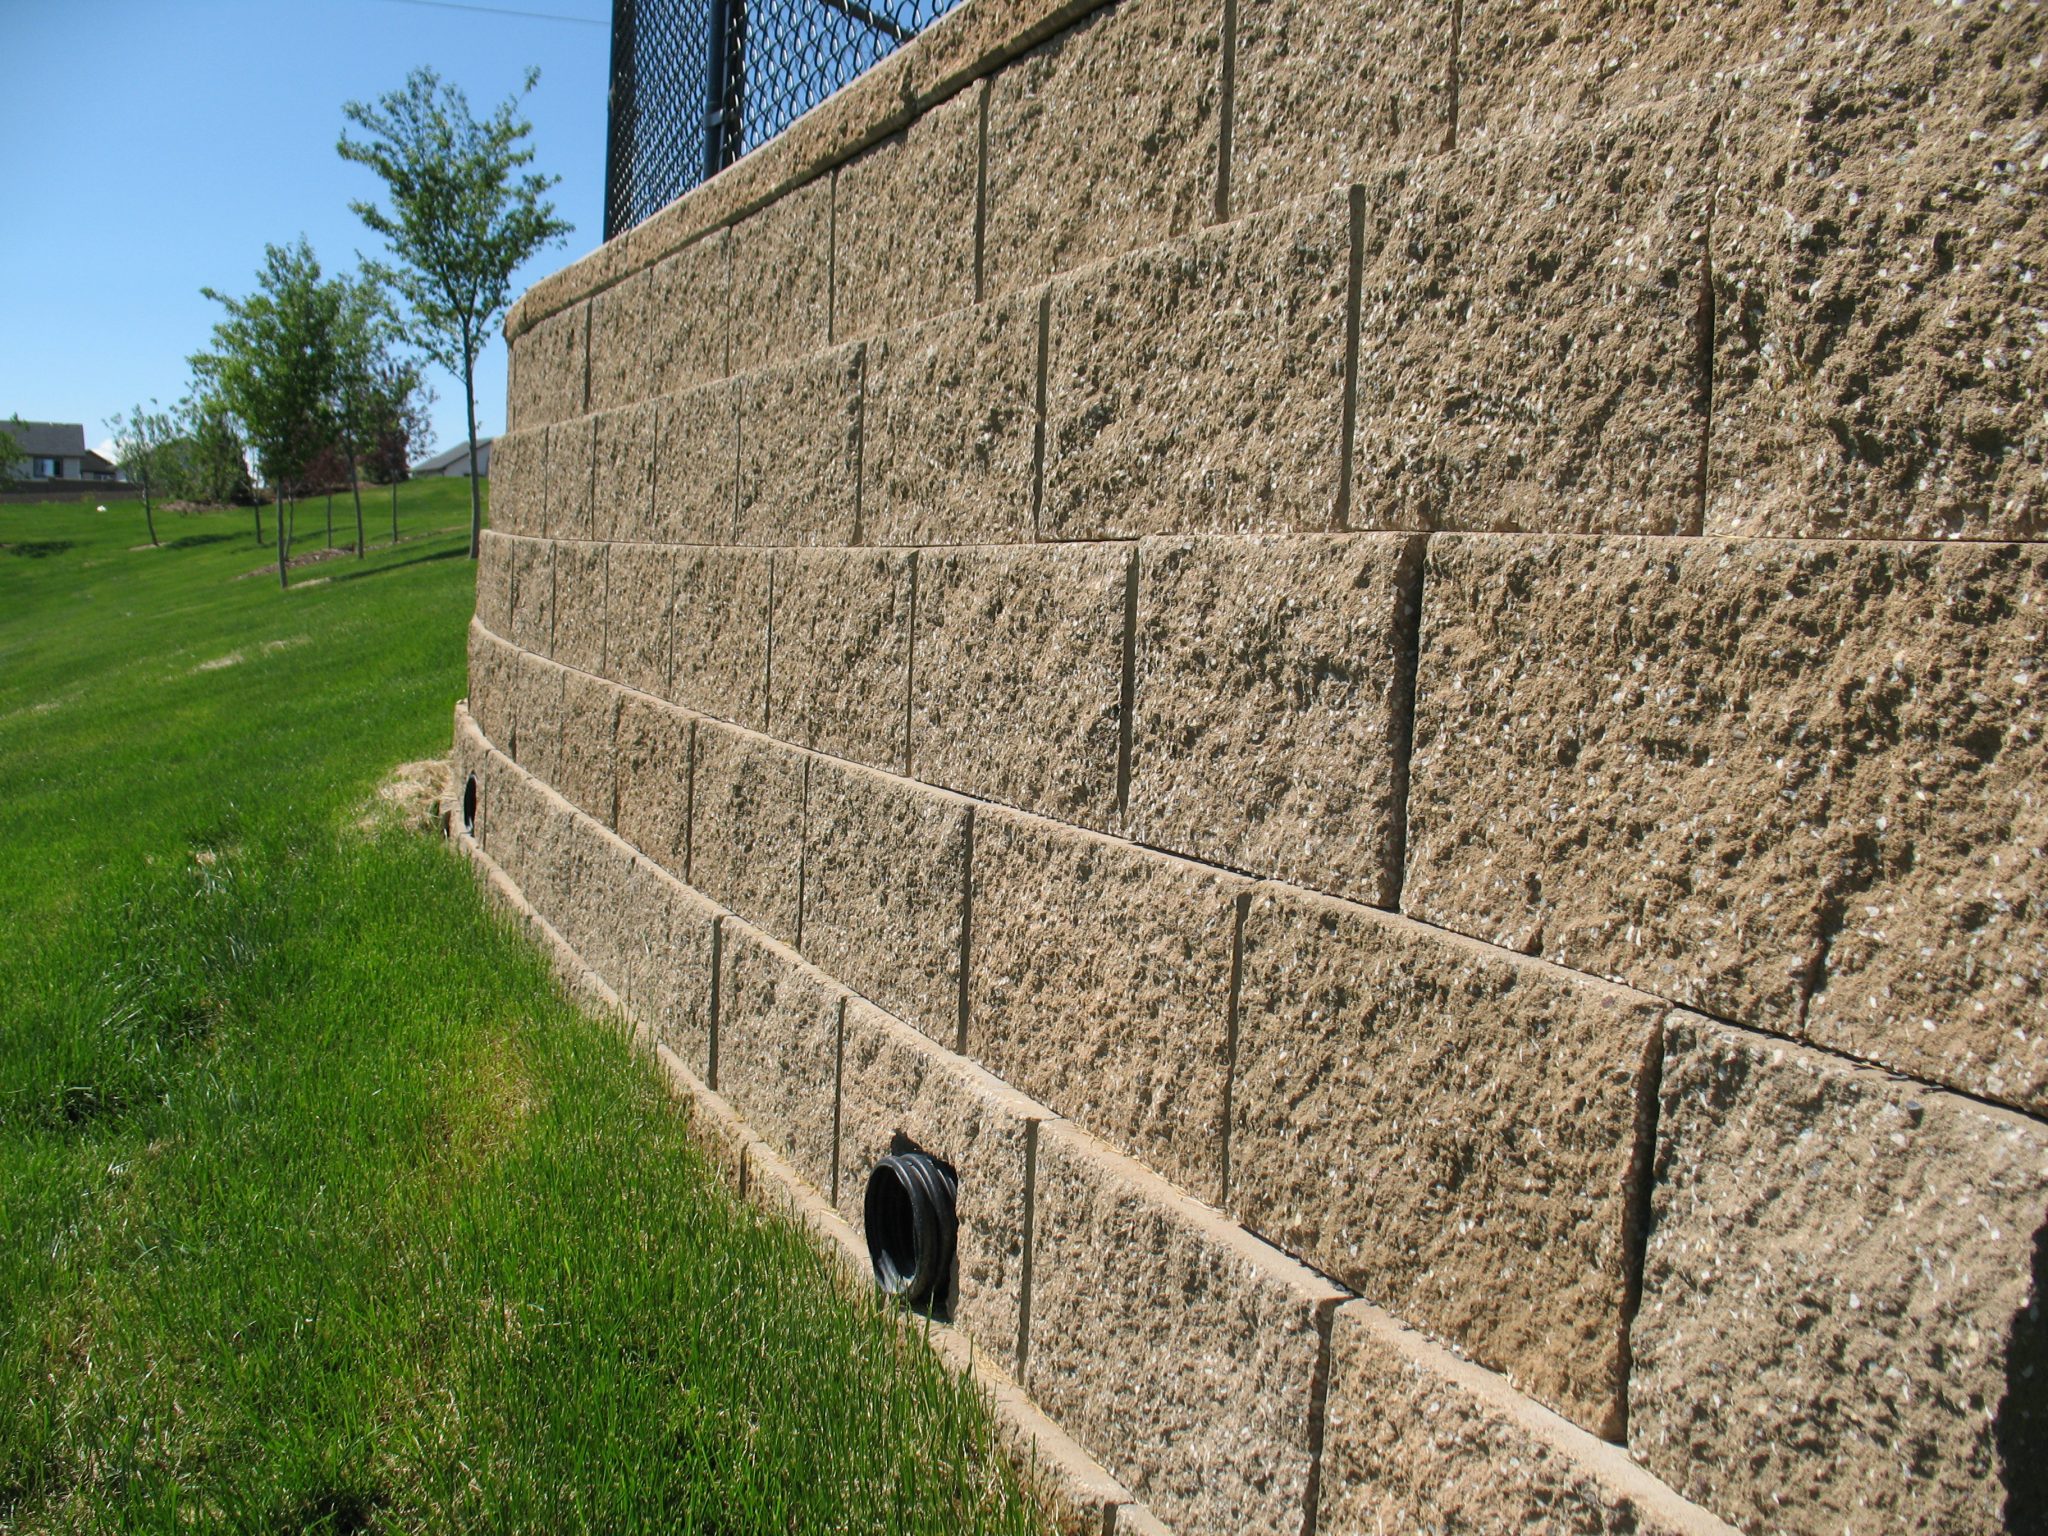 Should a Retaining Wall Be Leaning or Tilted?